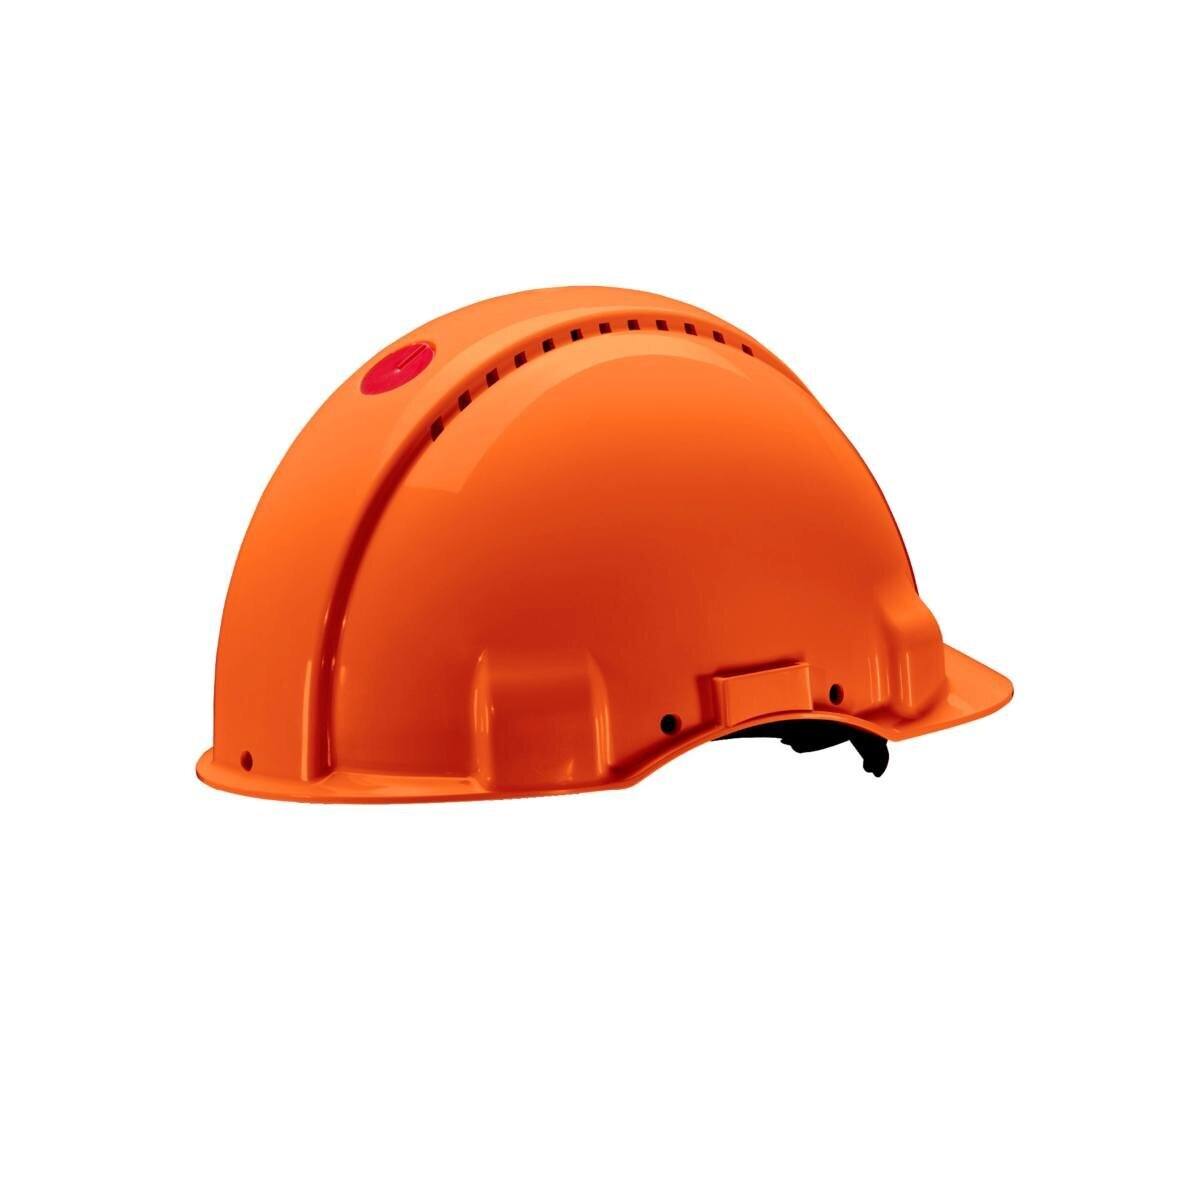 3M G3000 safety helmet G30MUO in orange, ventilated, with uvicator, ratchet and leather sweatband